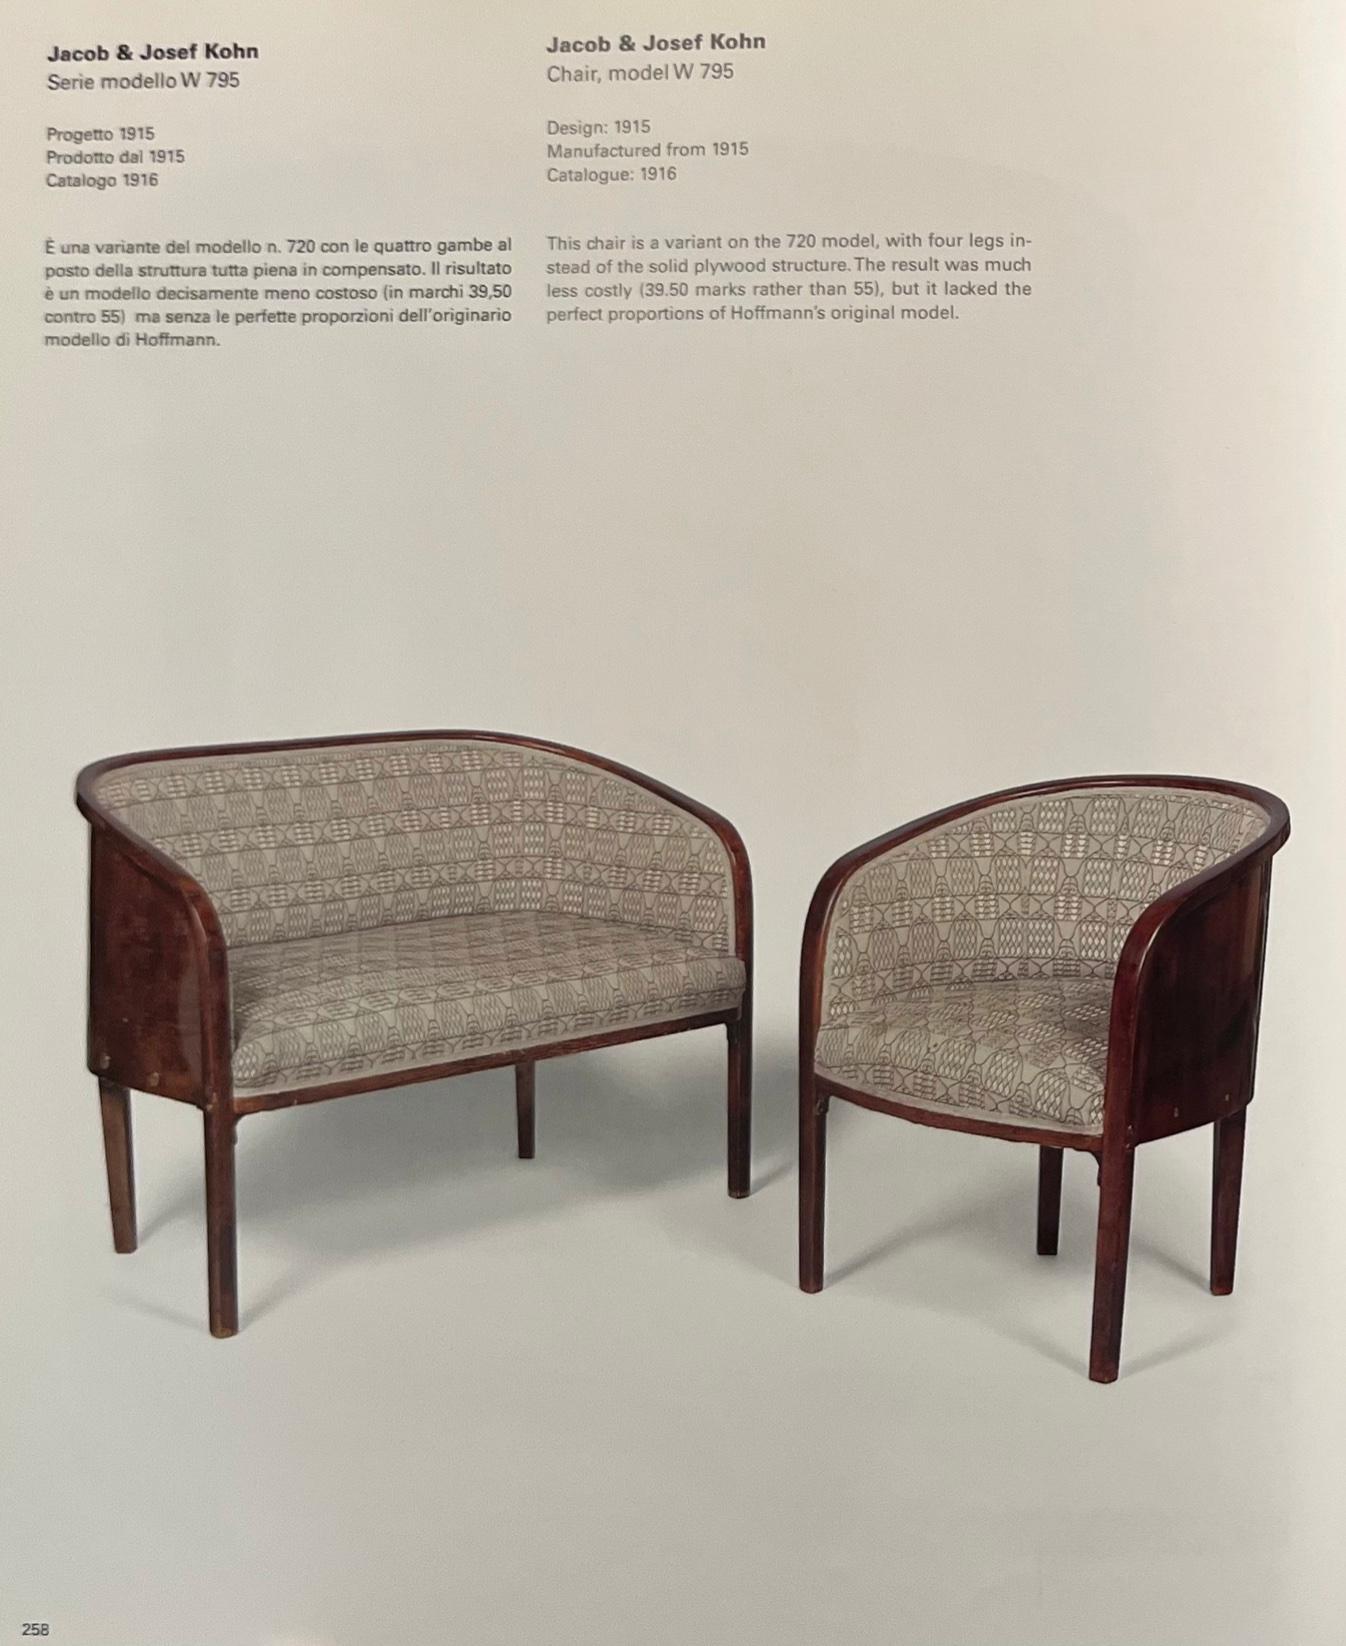 Austrian Secession Armchair by Josef Hoffmann (1914), manufactured by Thonet (1919)